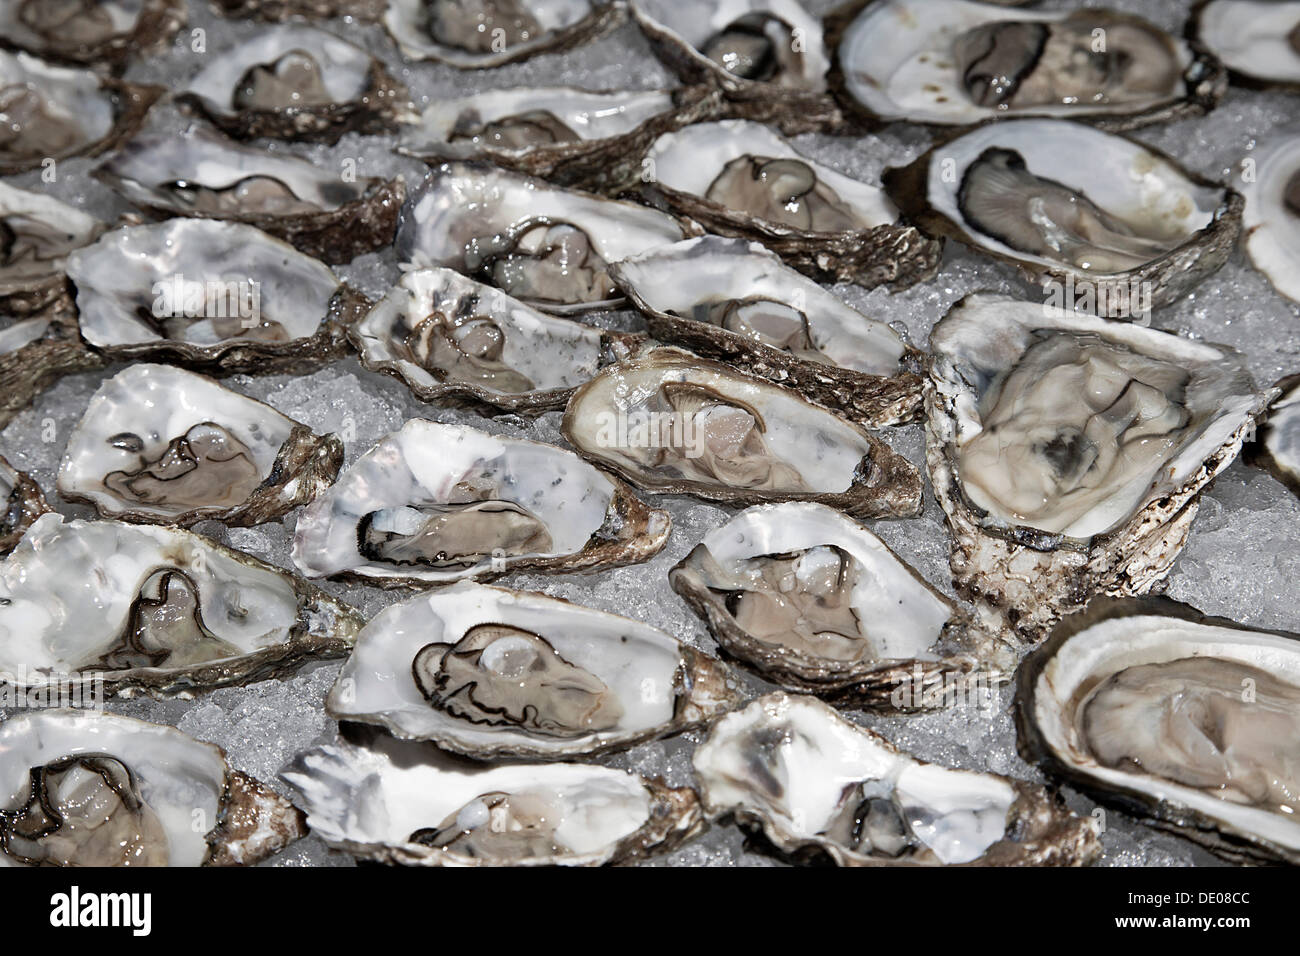 Fresh oysters on crushed ice Stock Photo